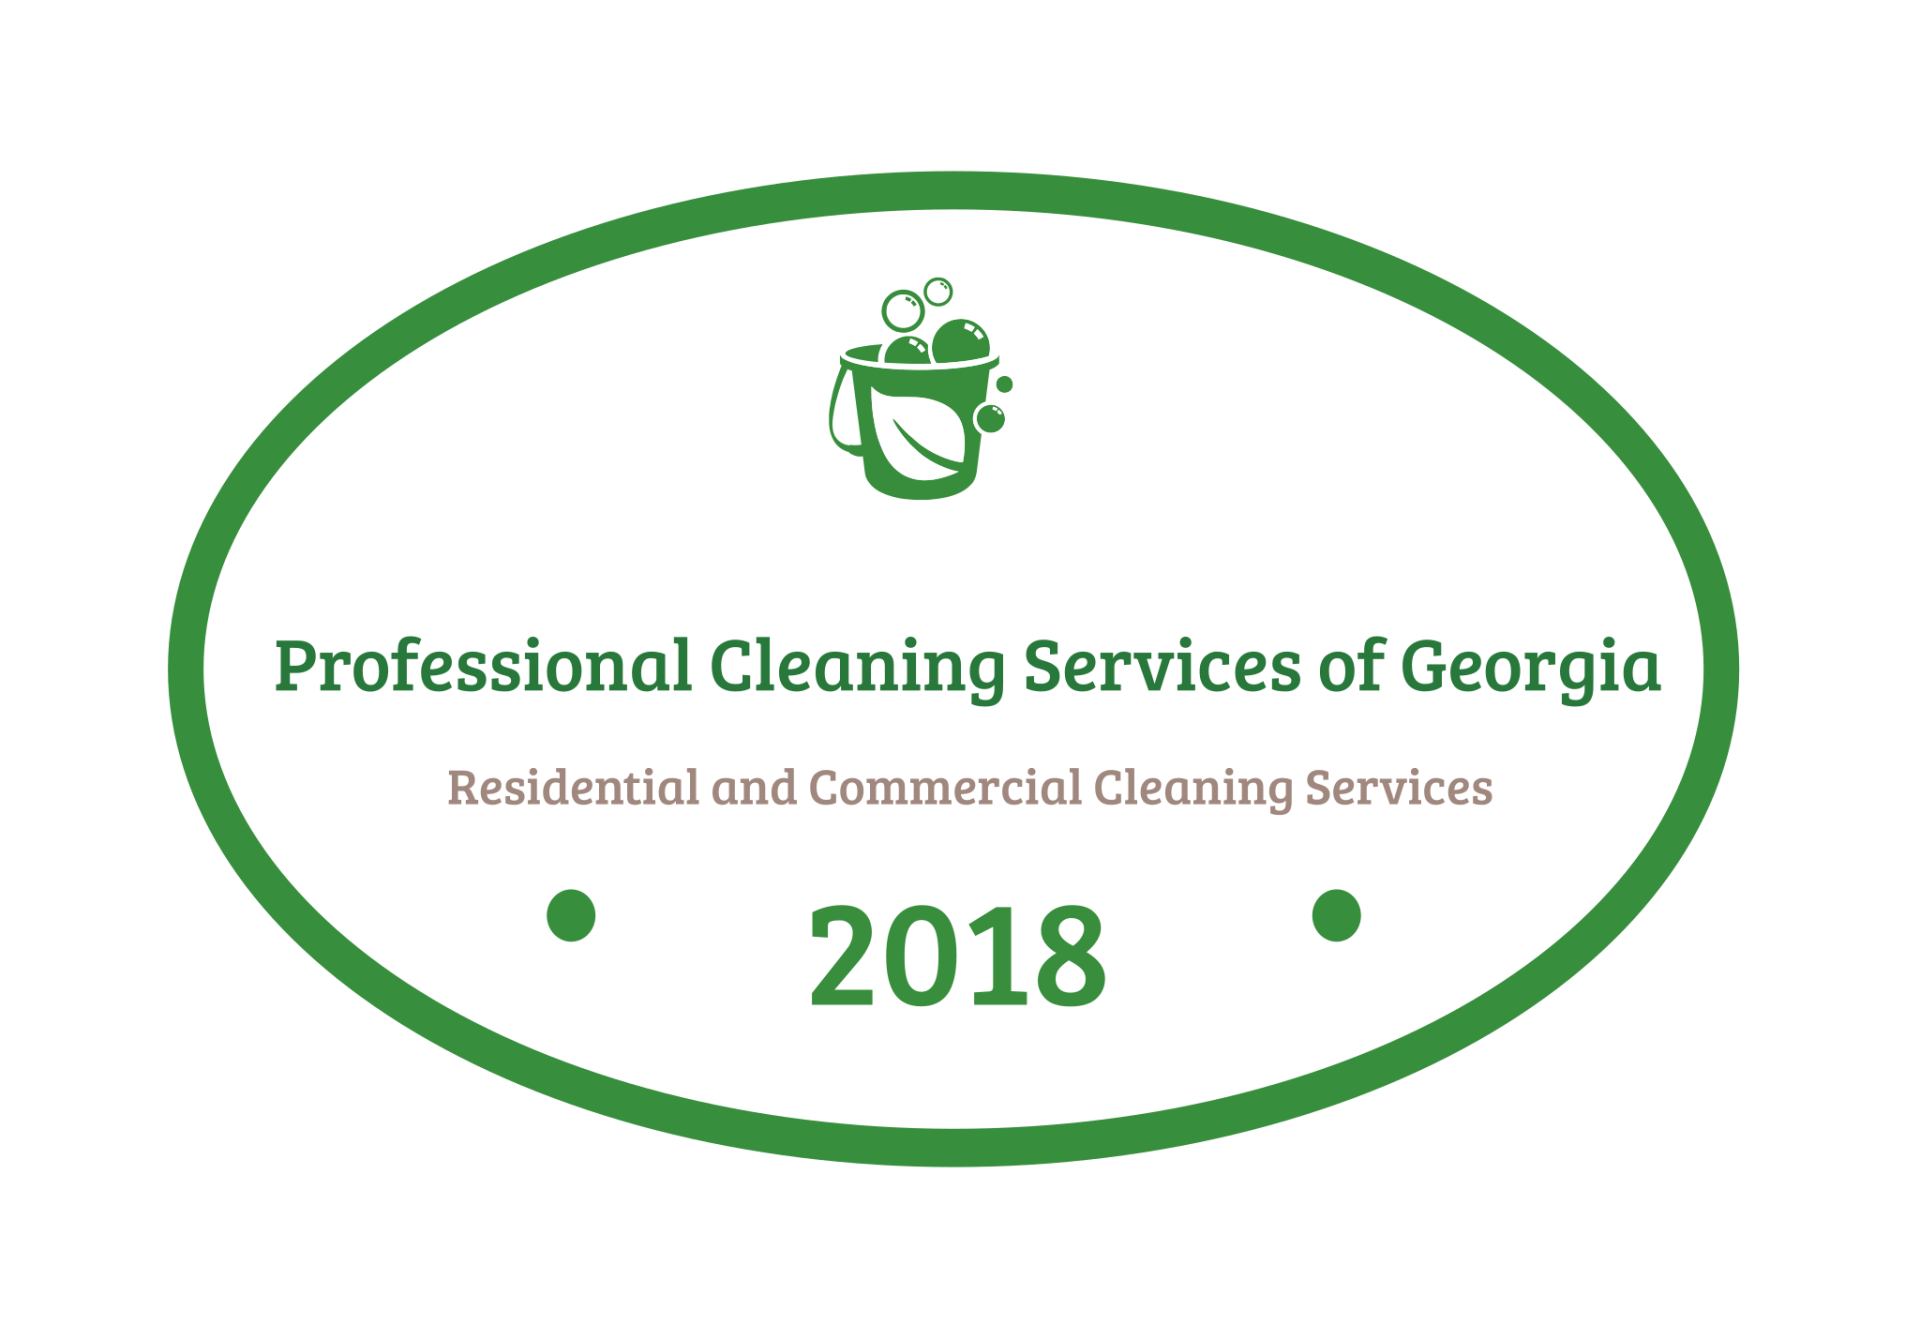 Professional Cleaning Services of Georgia, Inc